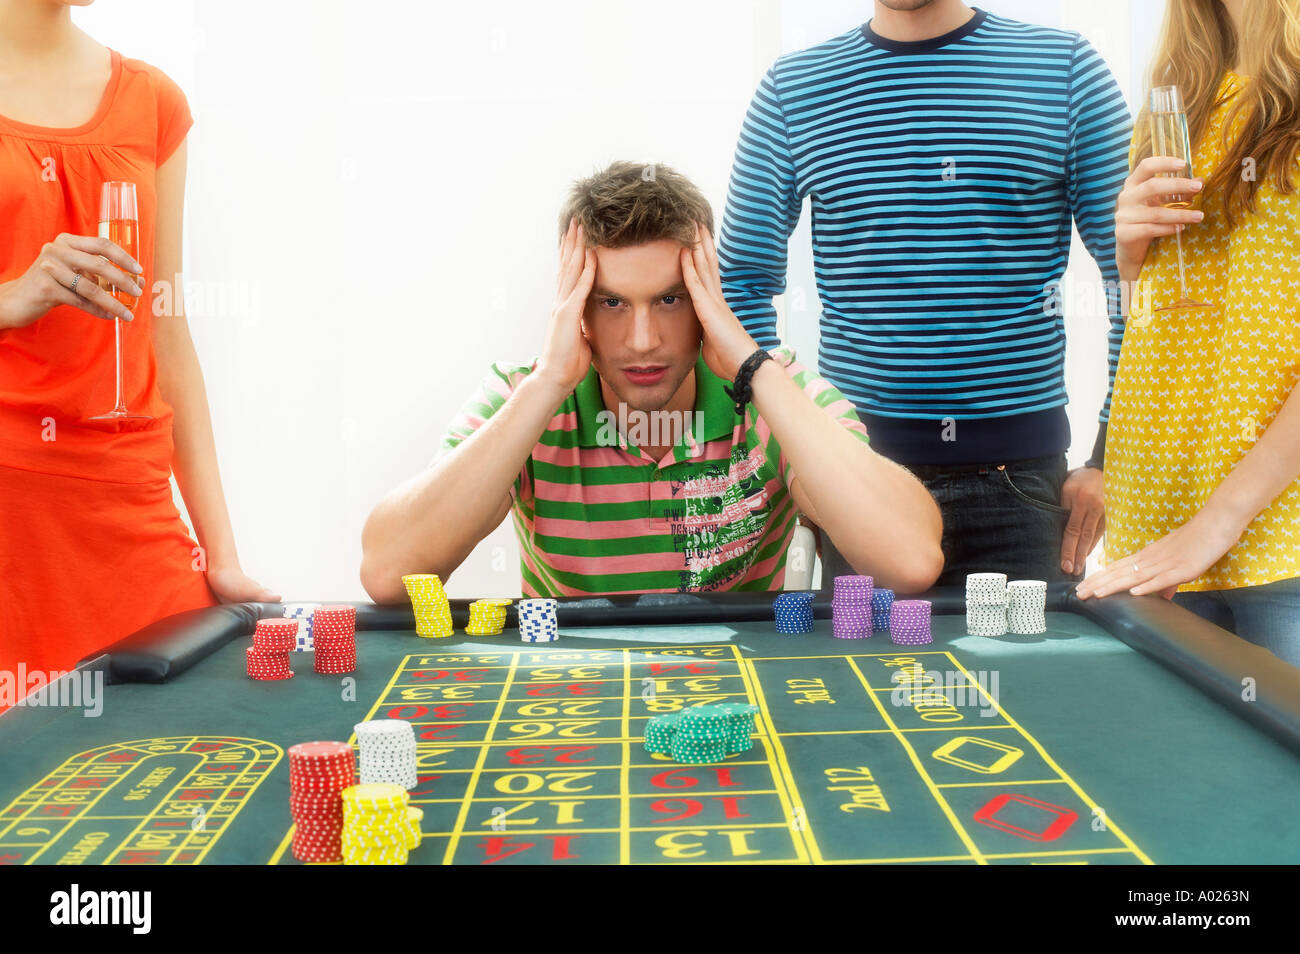 Young frustrated man at roulette table with friends Stock Photo